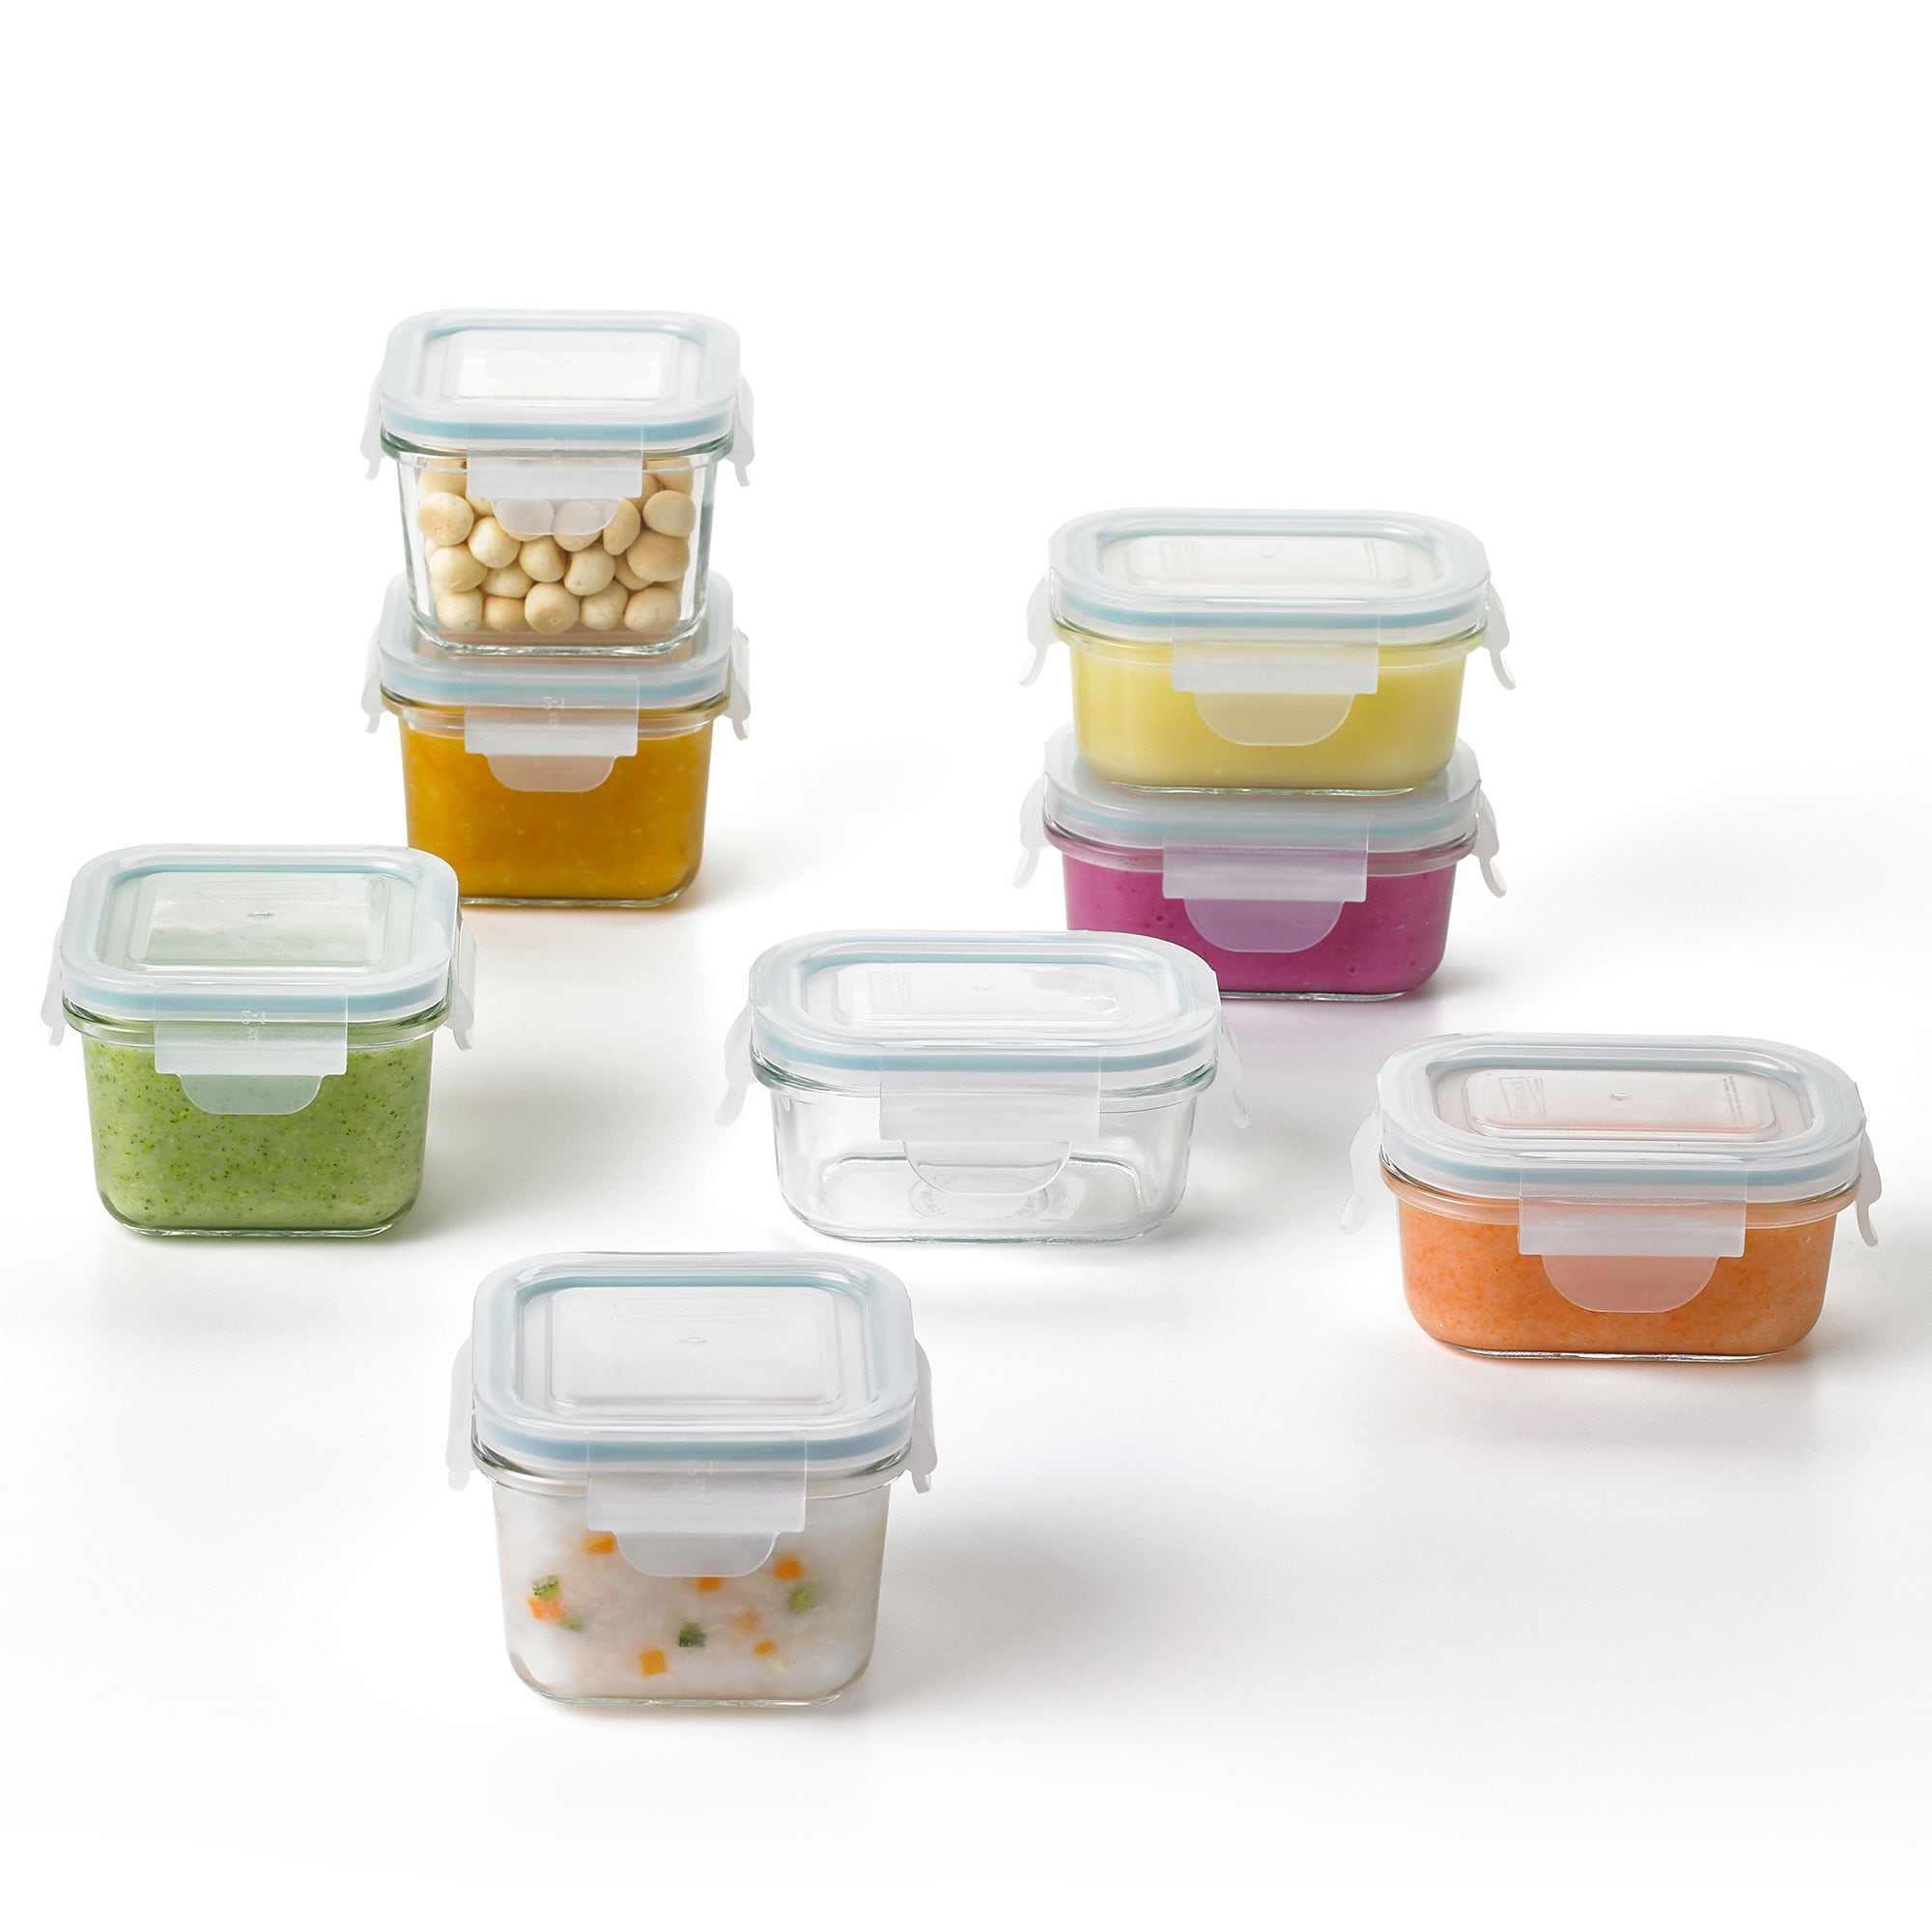 https://ak1.ostkcdn.com/images/products/is/images/direct/0ab5ad607ac09eb787d2dcb9a49cb6c9ef36ac62/Glasslock-Mini-5-and-7-Ounce-Tempered-Glass-Food-Storage-Container-Set%2C-8-Pieces.jpg